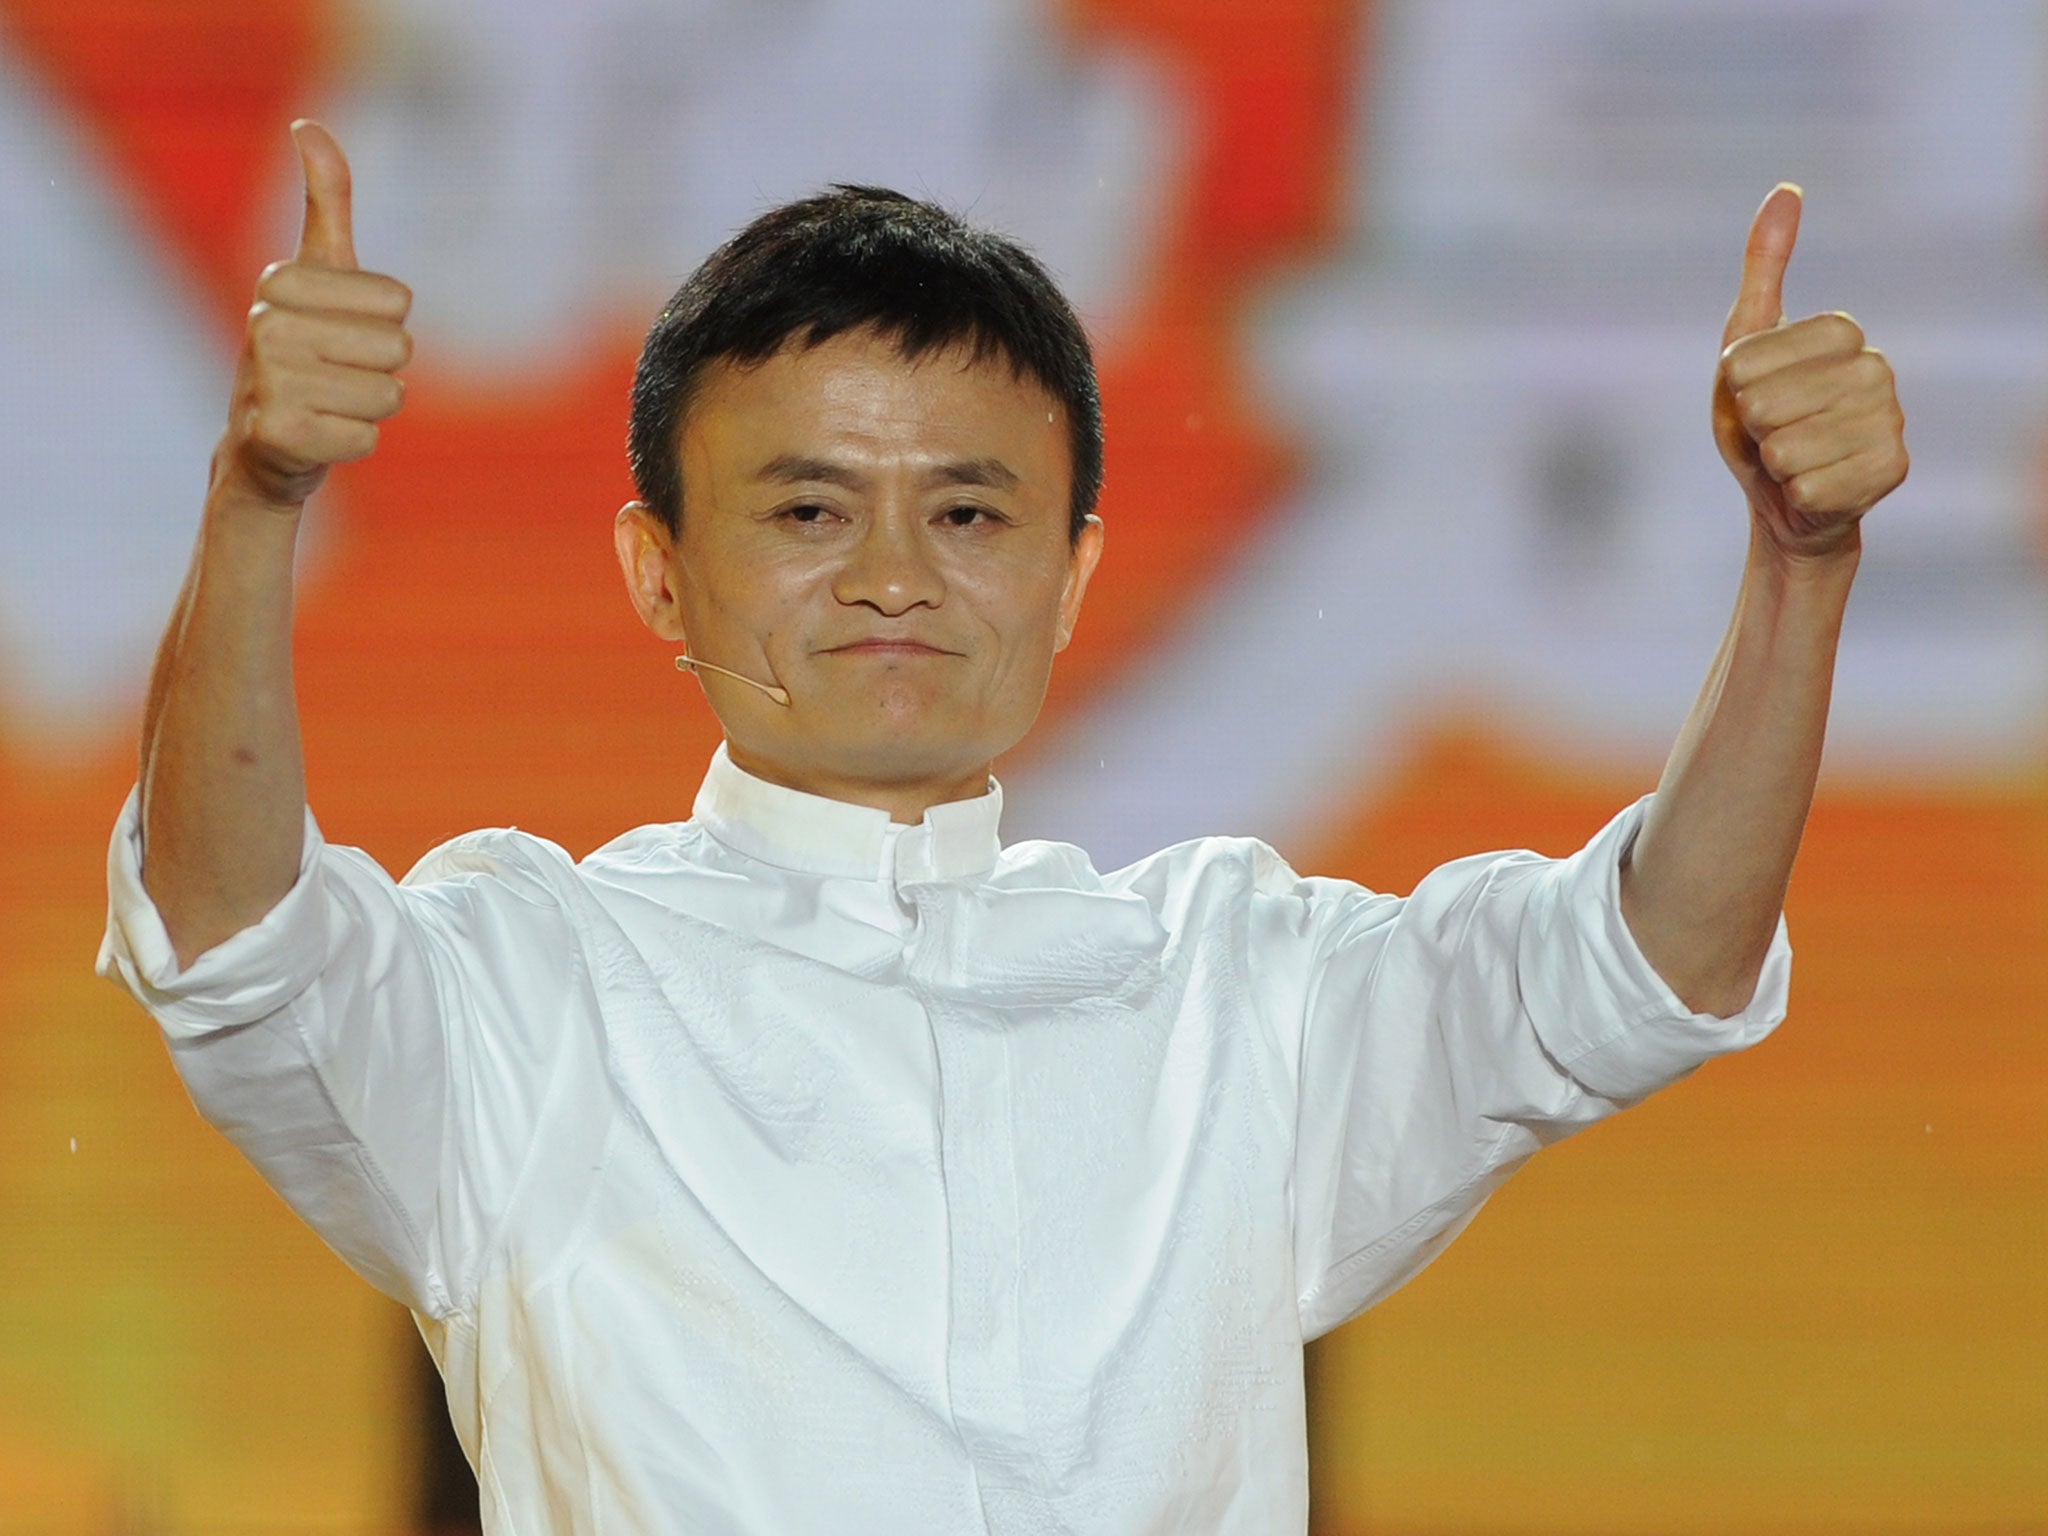 Jack Ma, the charismatic former English teacher who founded Alibaba in 1999